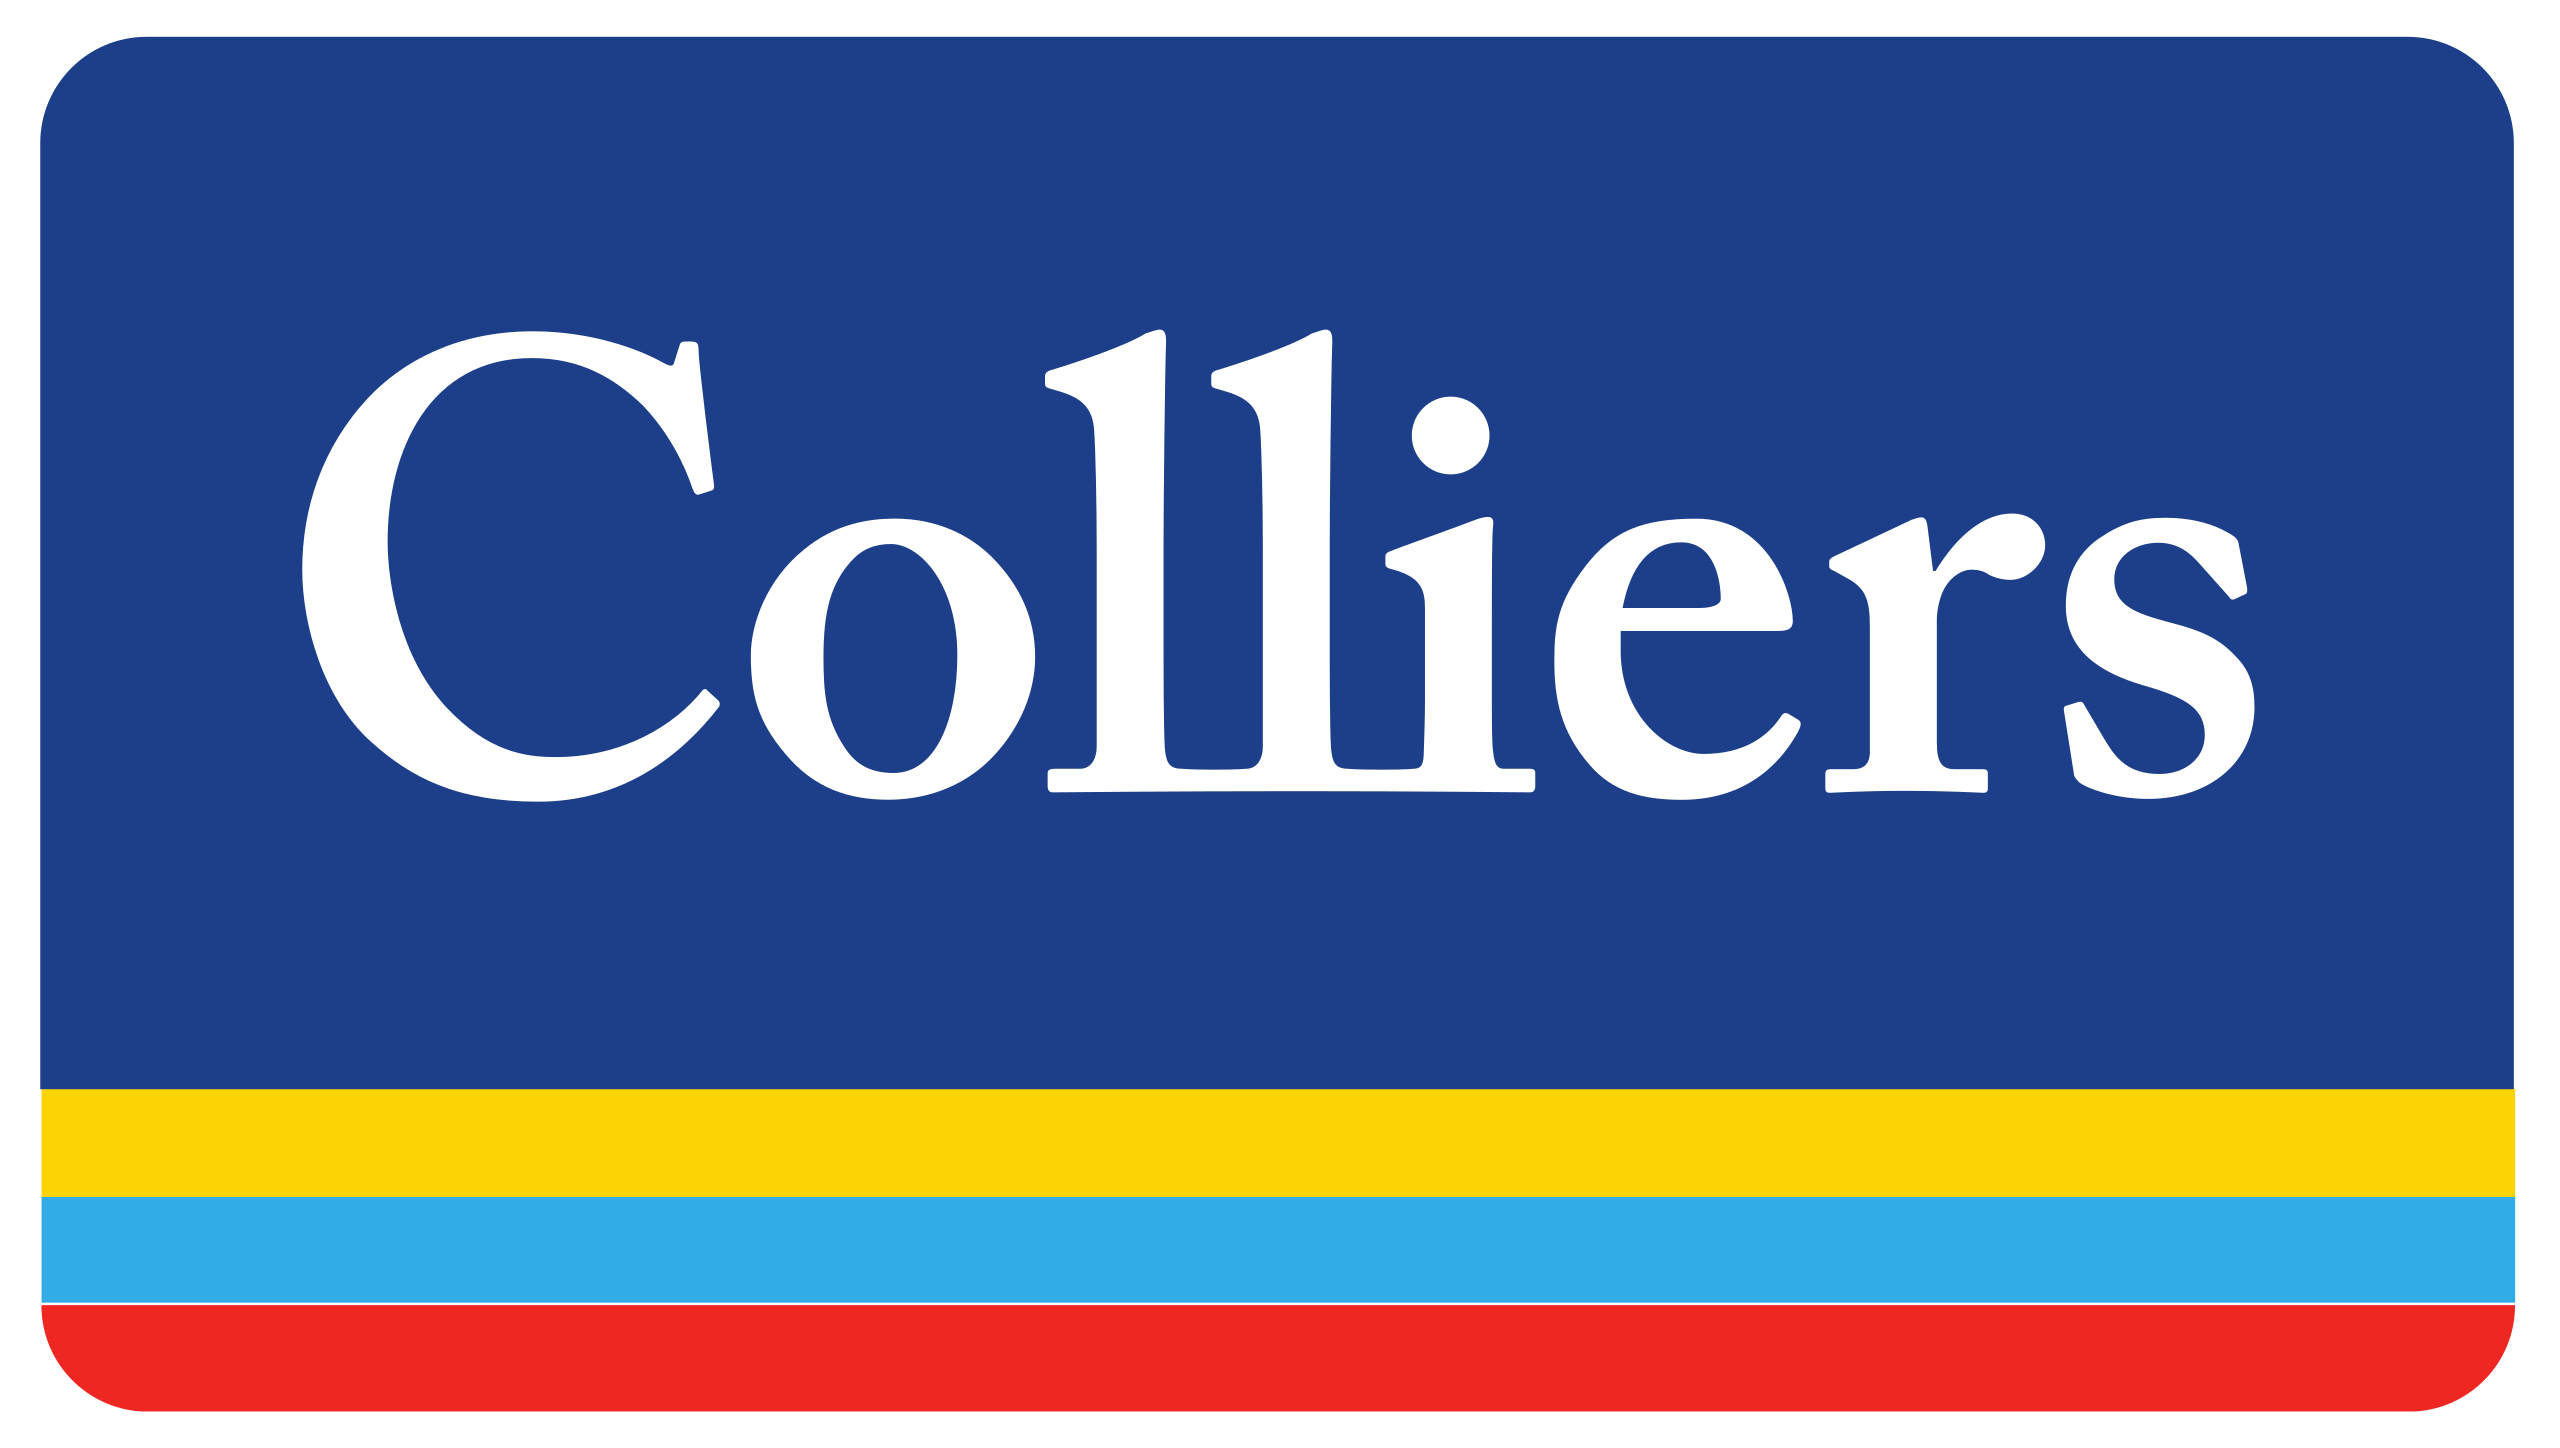 Colliers Rolleston Retail Mall Management Logo